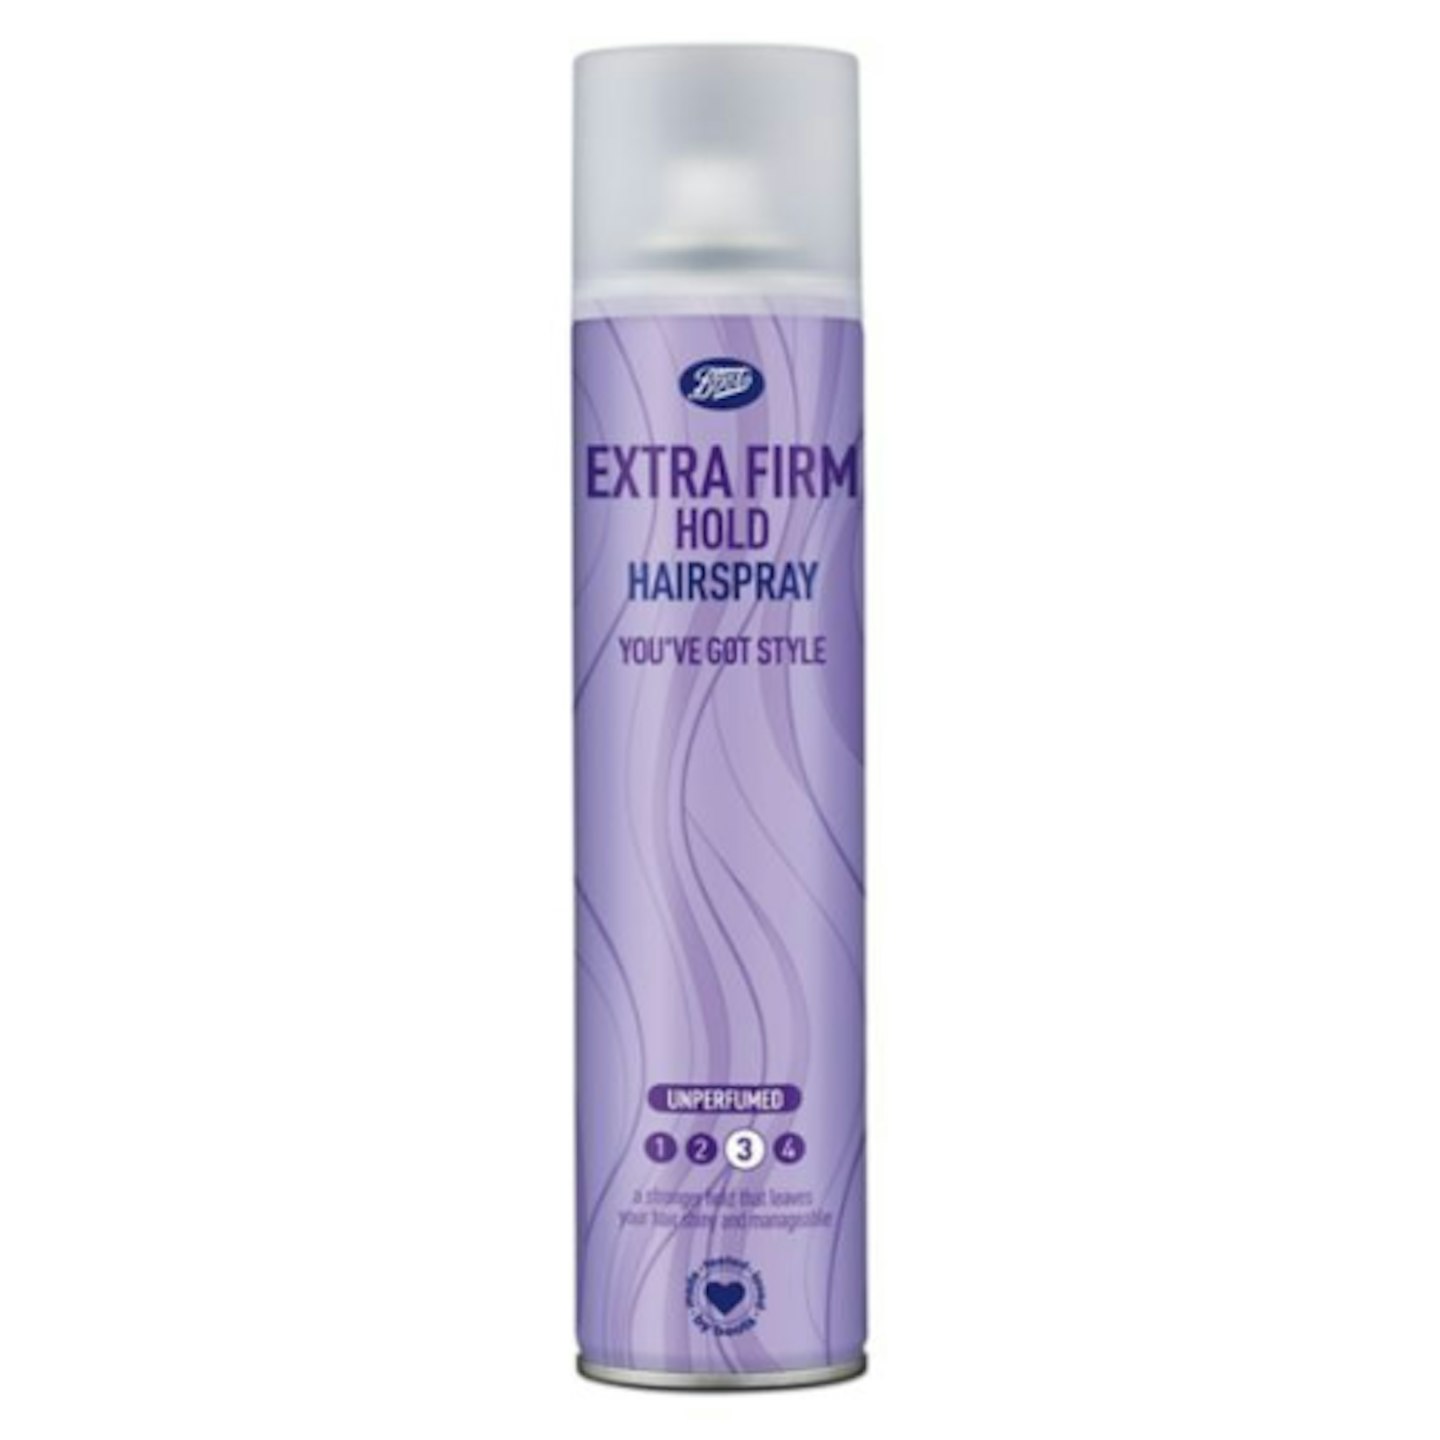 Boots everyday unperfumed hairspray extra firm hold 300ml